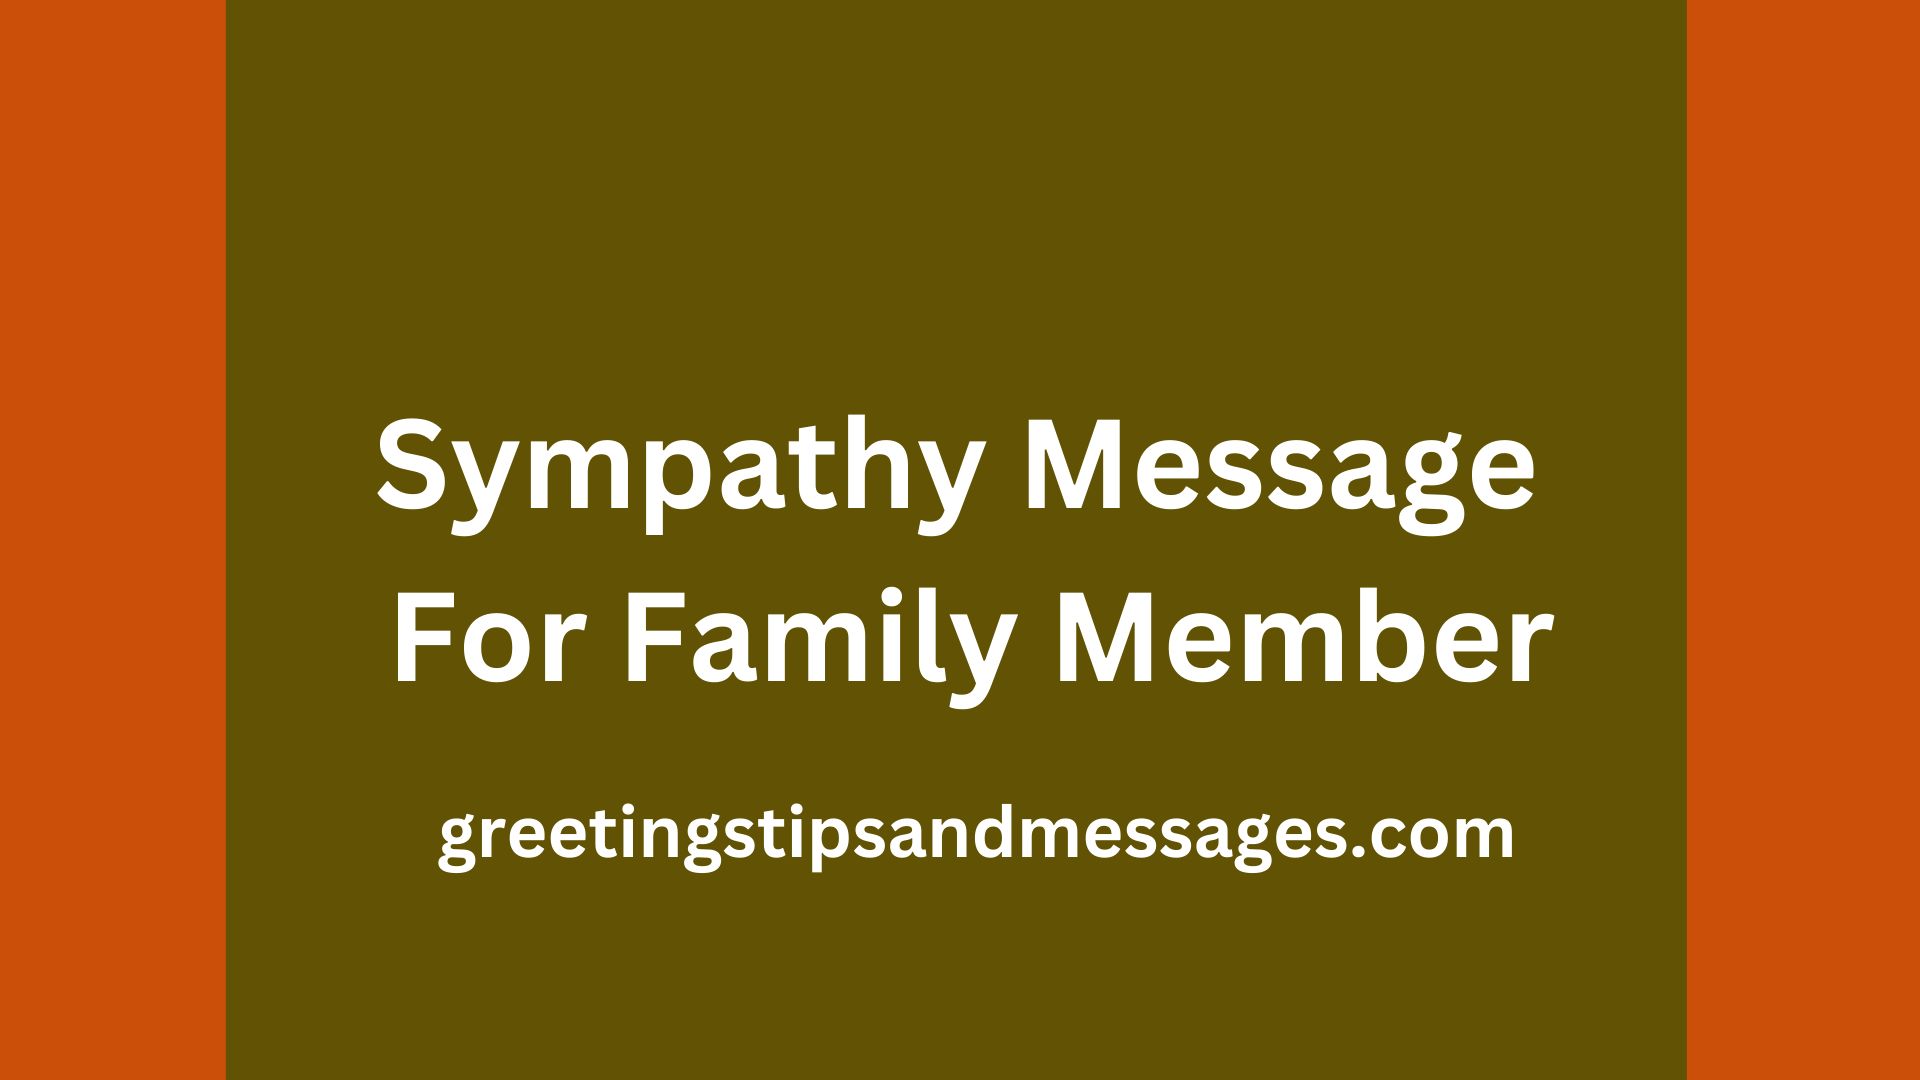 Sympathy Message For Family Member